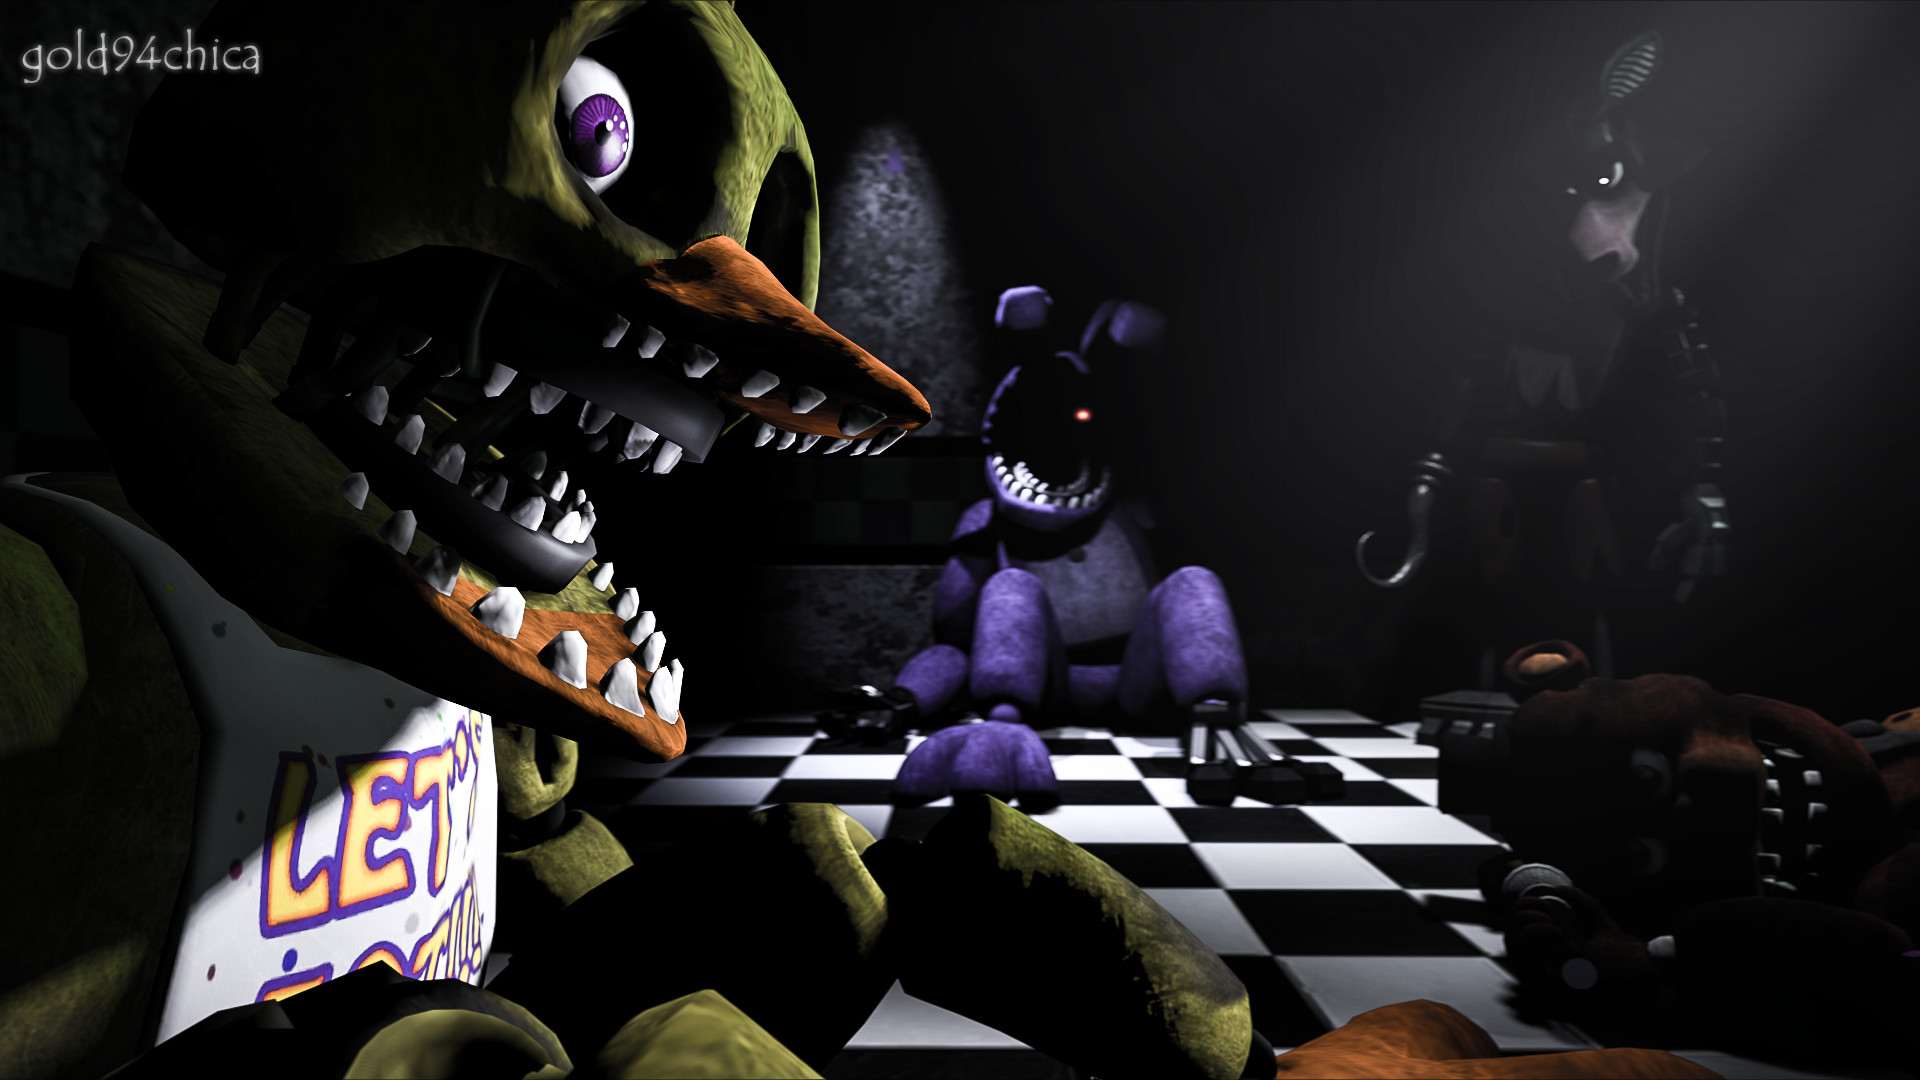 five nights at freddy's wallpaper,games,pc game,animation,technology,fictional character